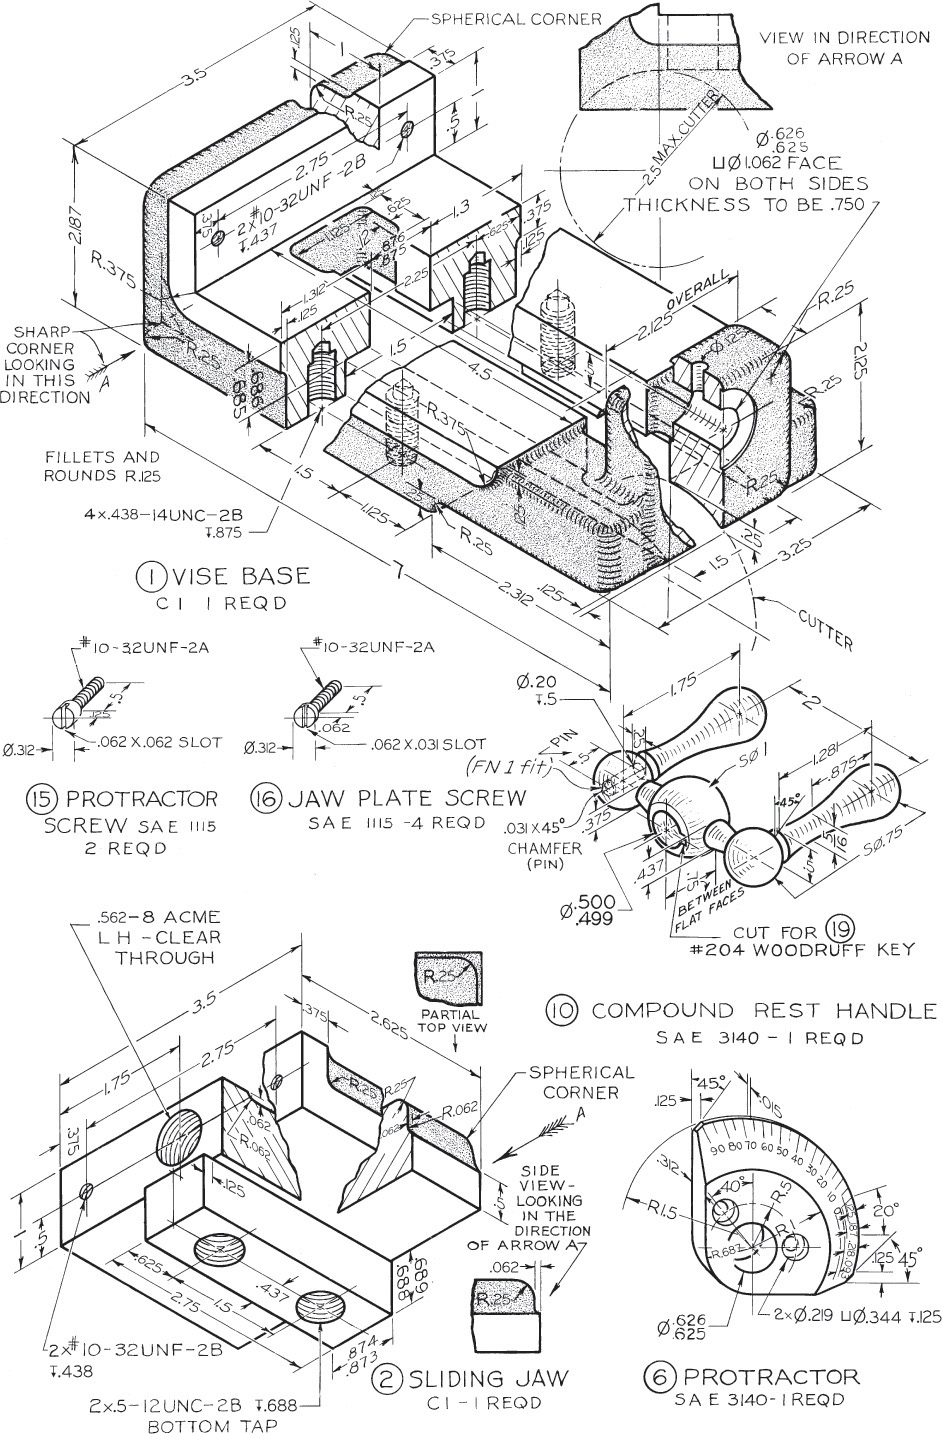 Figure depicts the detailed drawing of the Grinder vise.